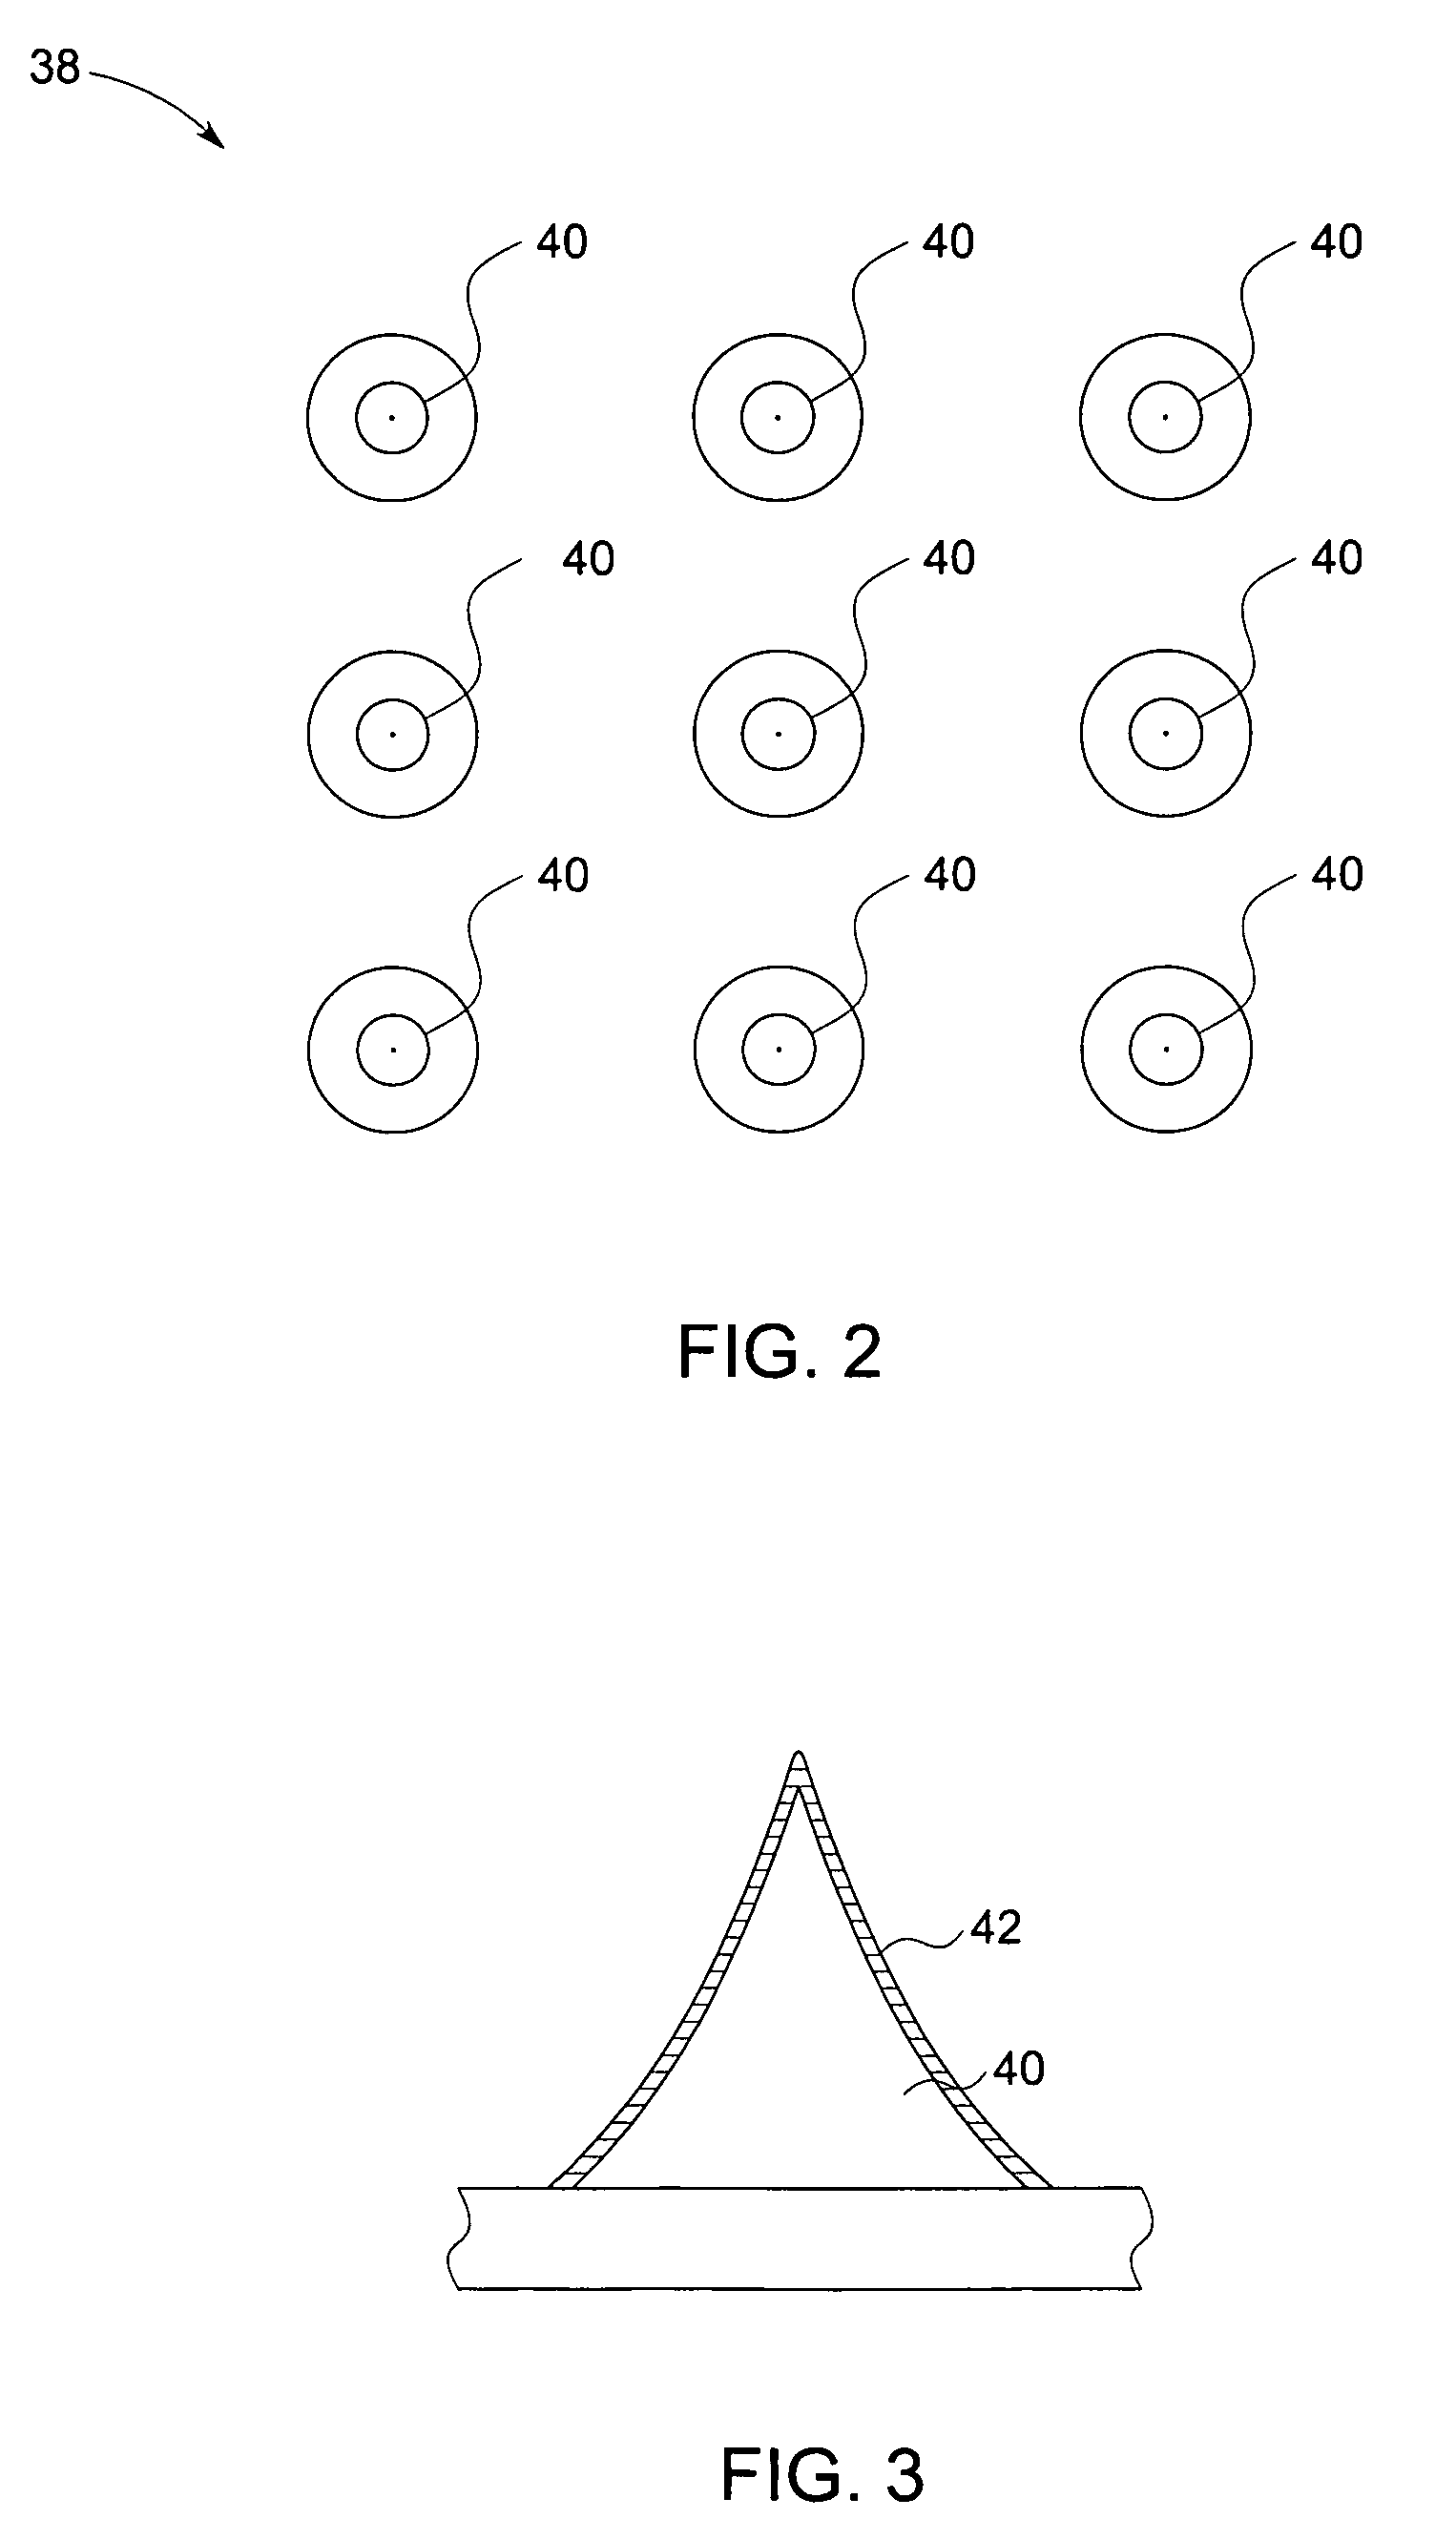 Field emitter X-ray source and system and method thereof